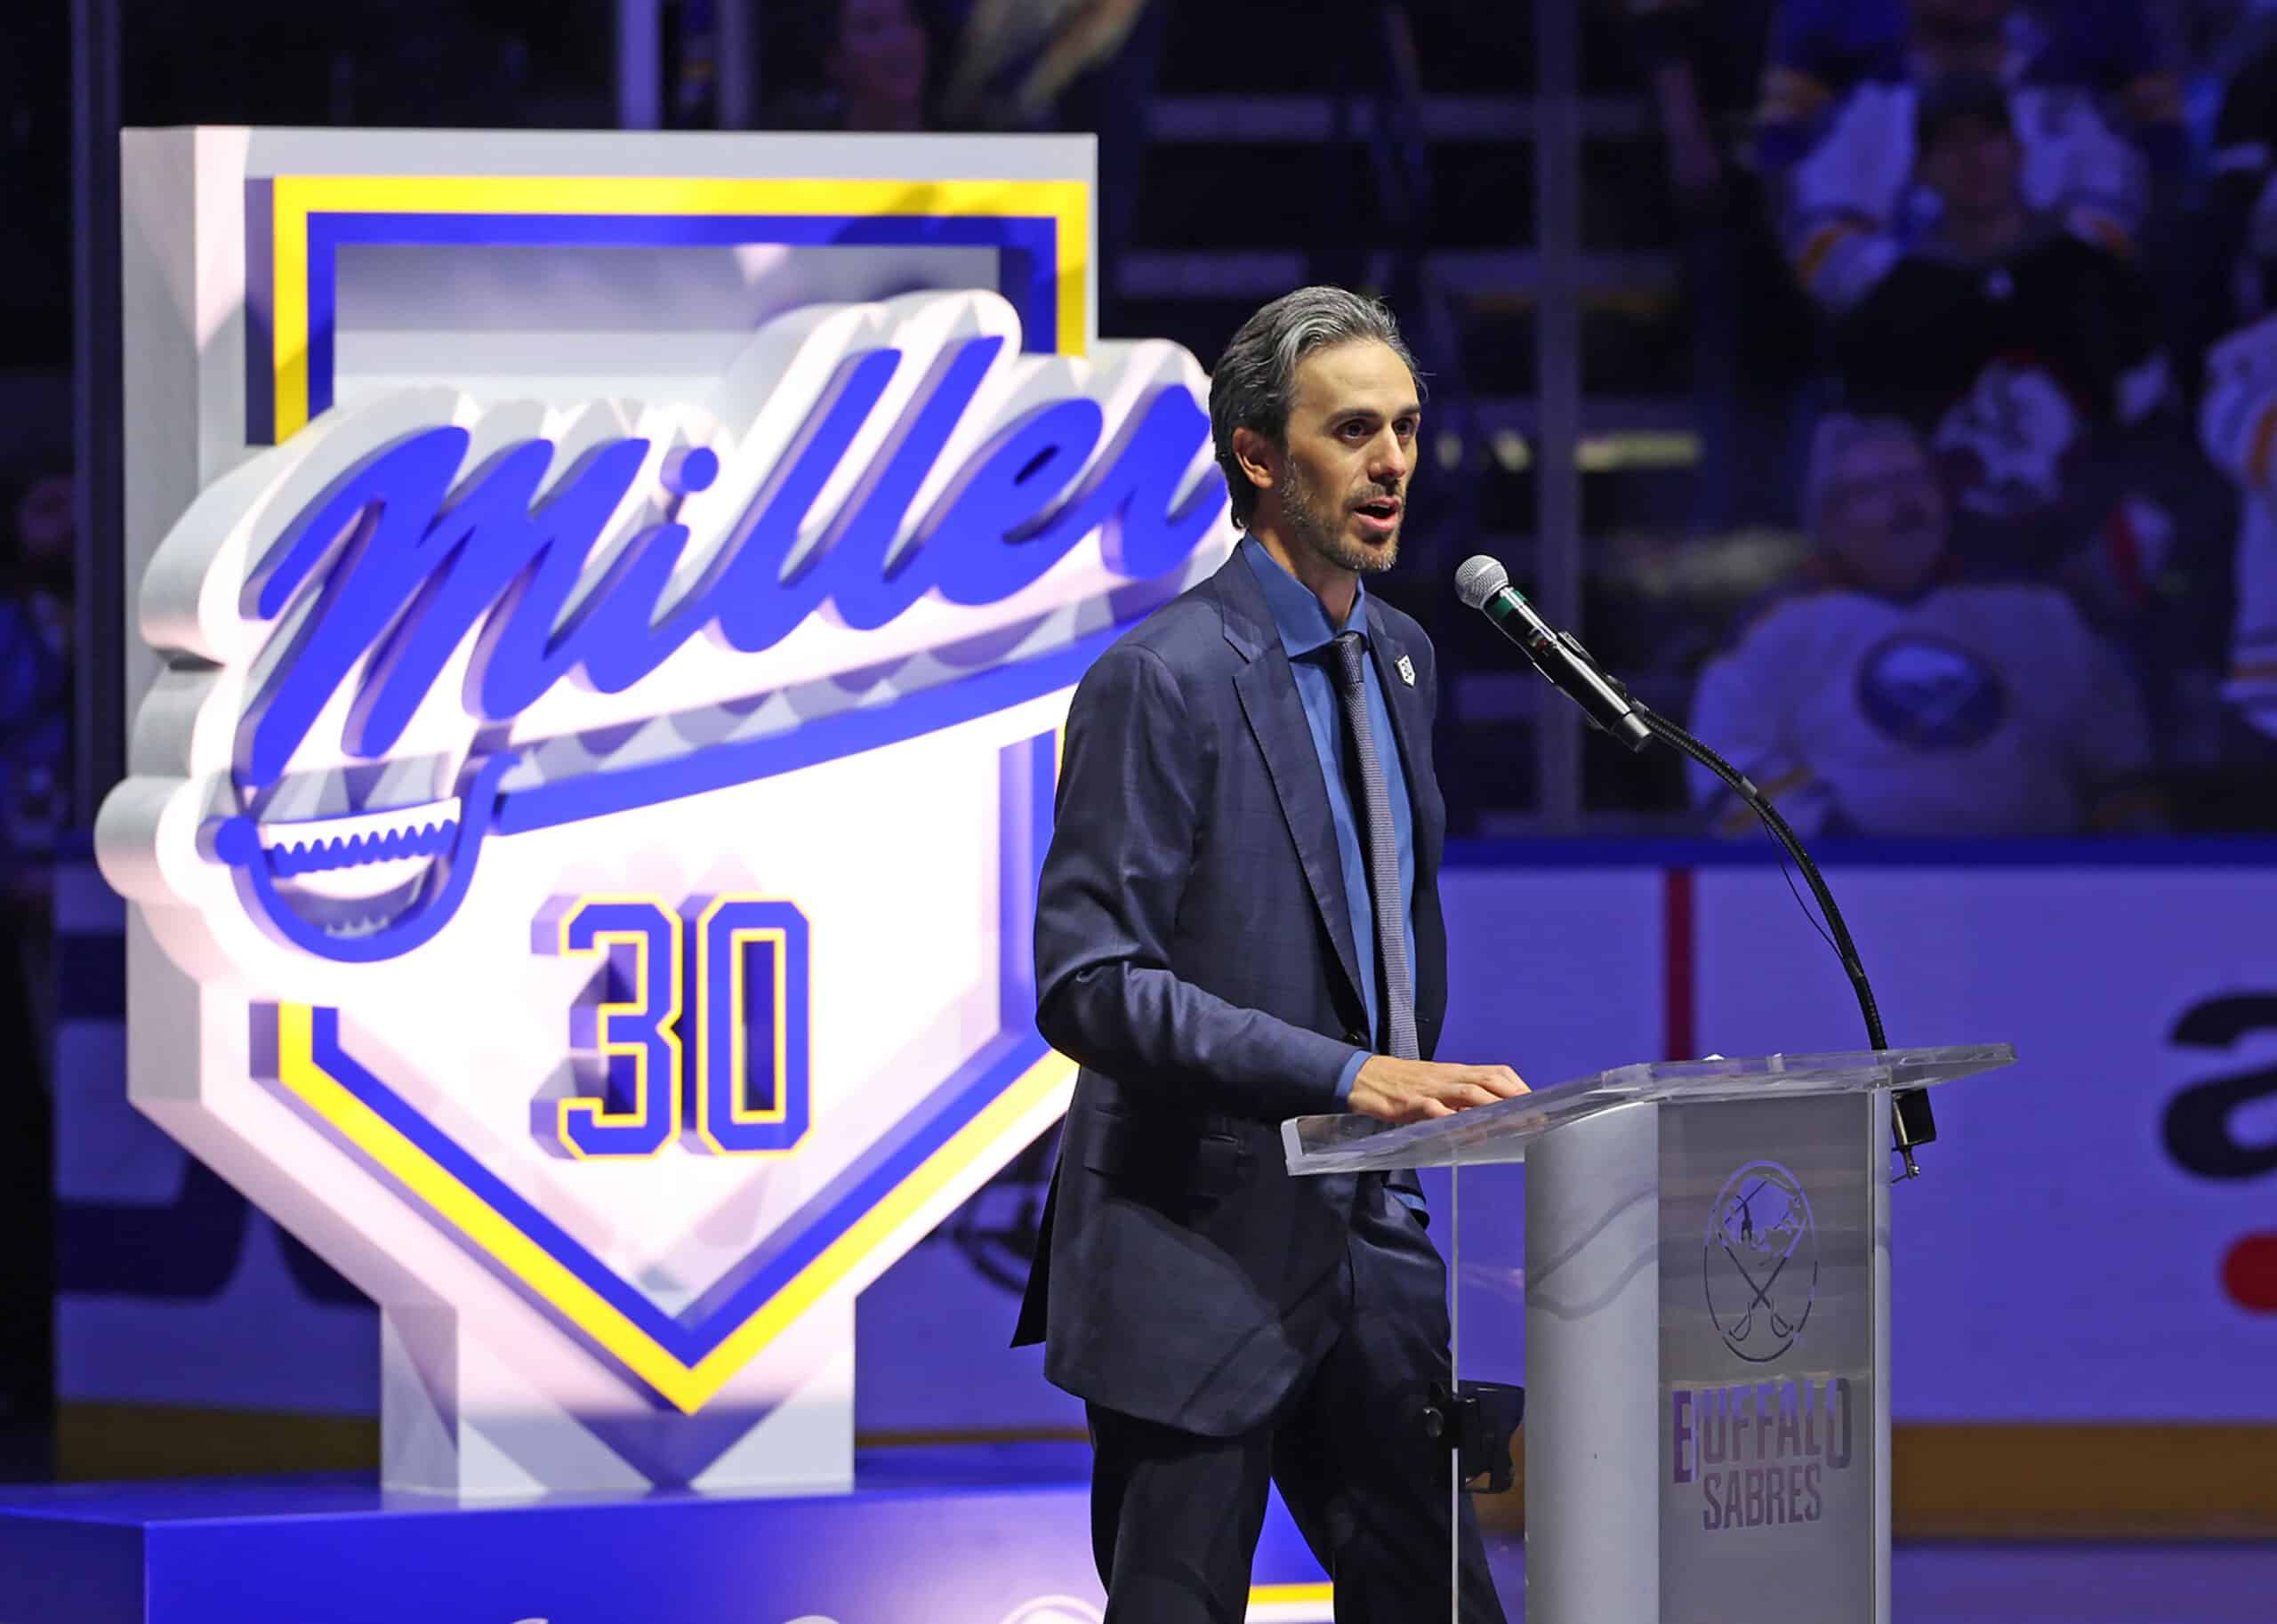 Former Buffalo Sabres goaltender Ryan Miller speaks to the crowd as he has his number retired before a game between the Buffalo Sabres and the New York Islanders at KeyBank Center. 